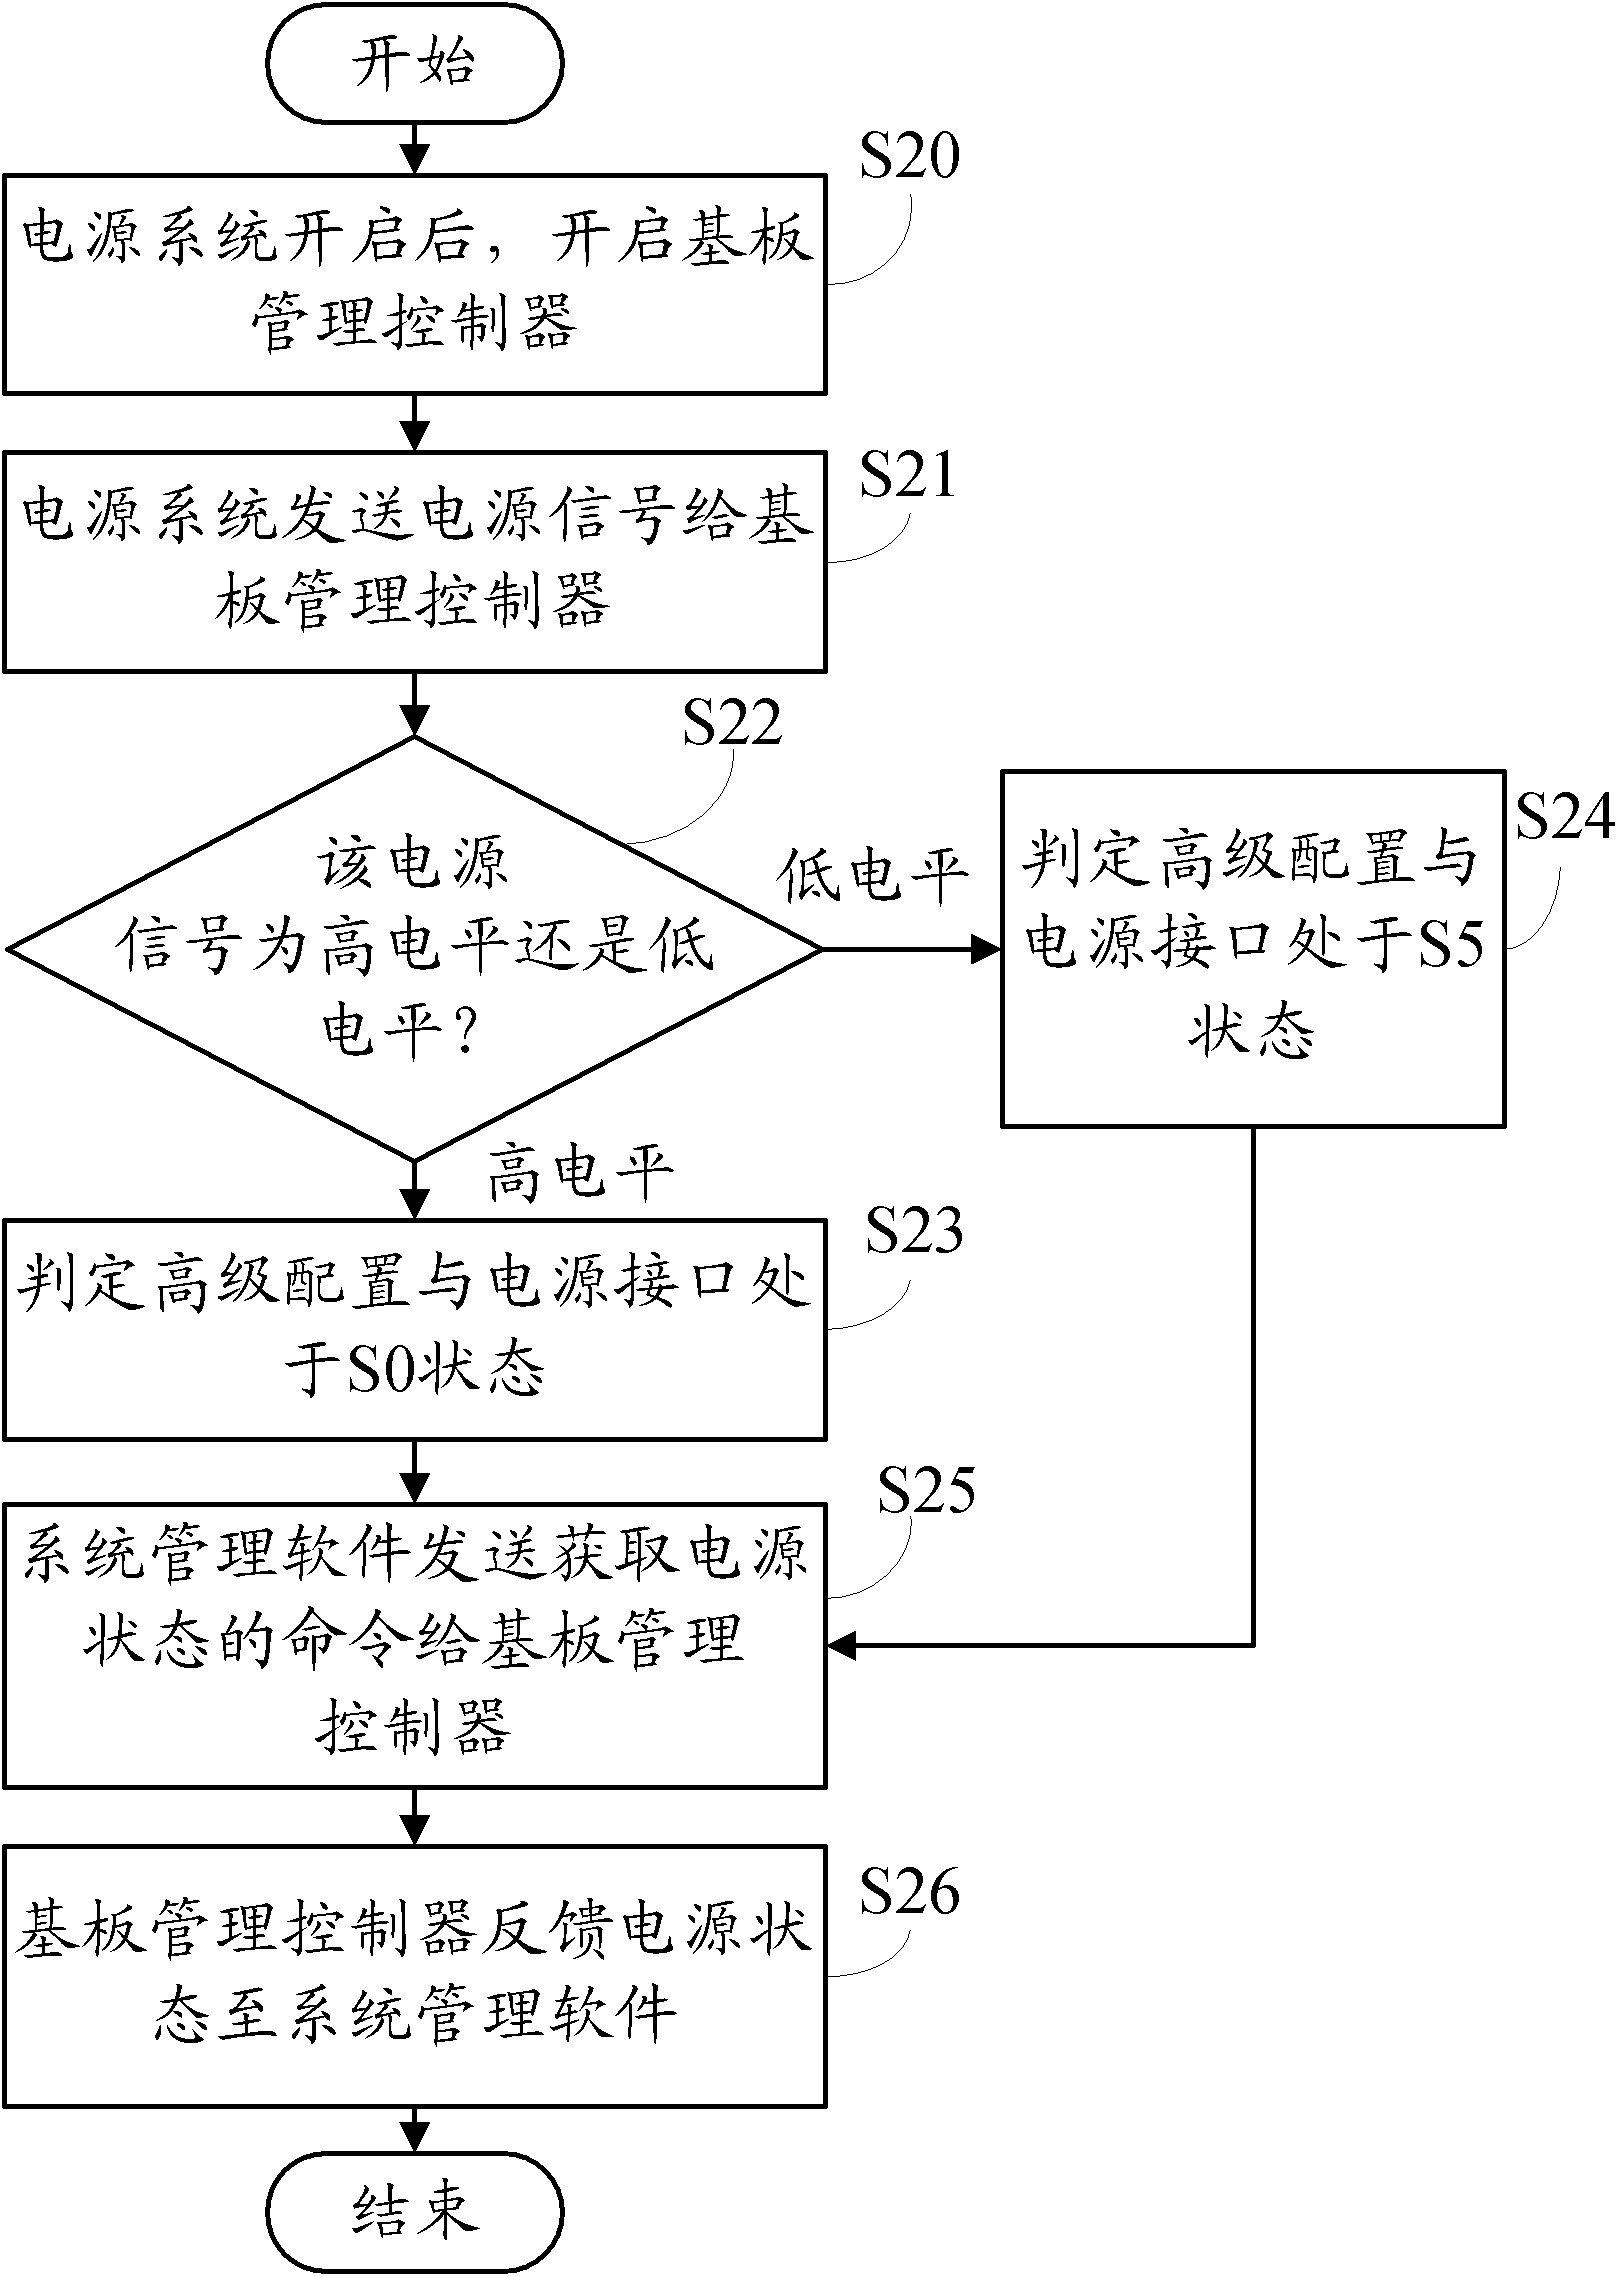 Synchronous obtaining method of power state